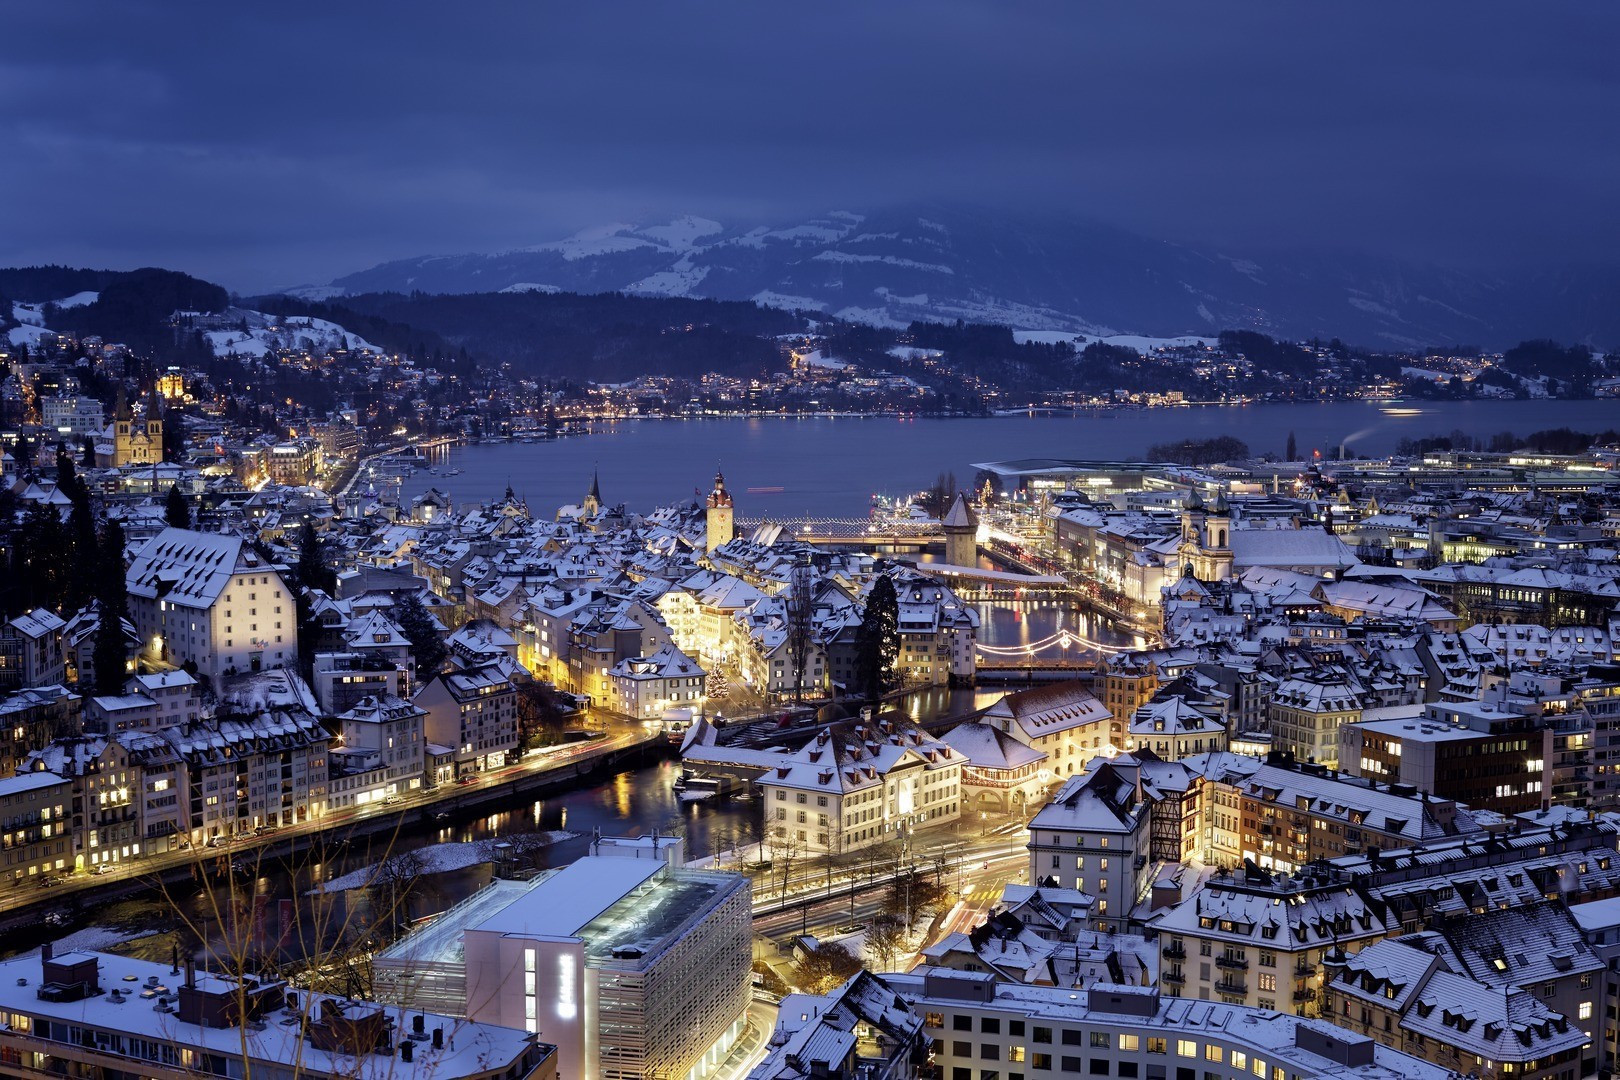 Switzerland is due to host the 2021 Winter World University Games in Lucerne, but the event has been postponed with no new dates set ©FISU